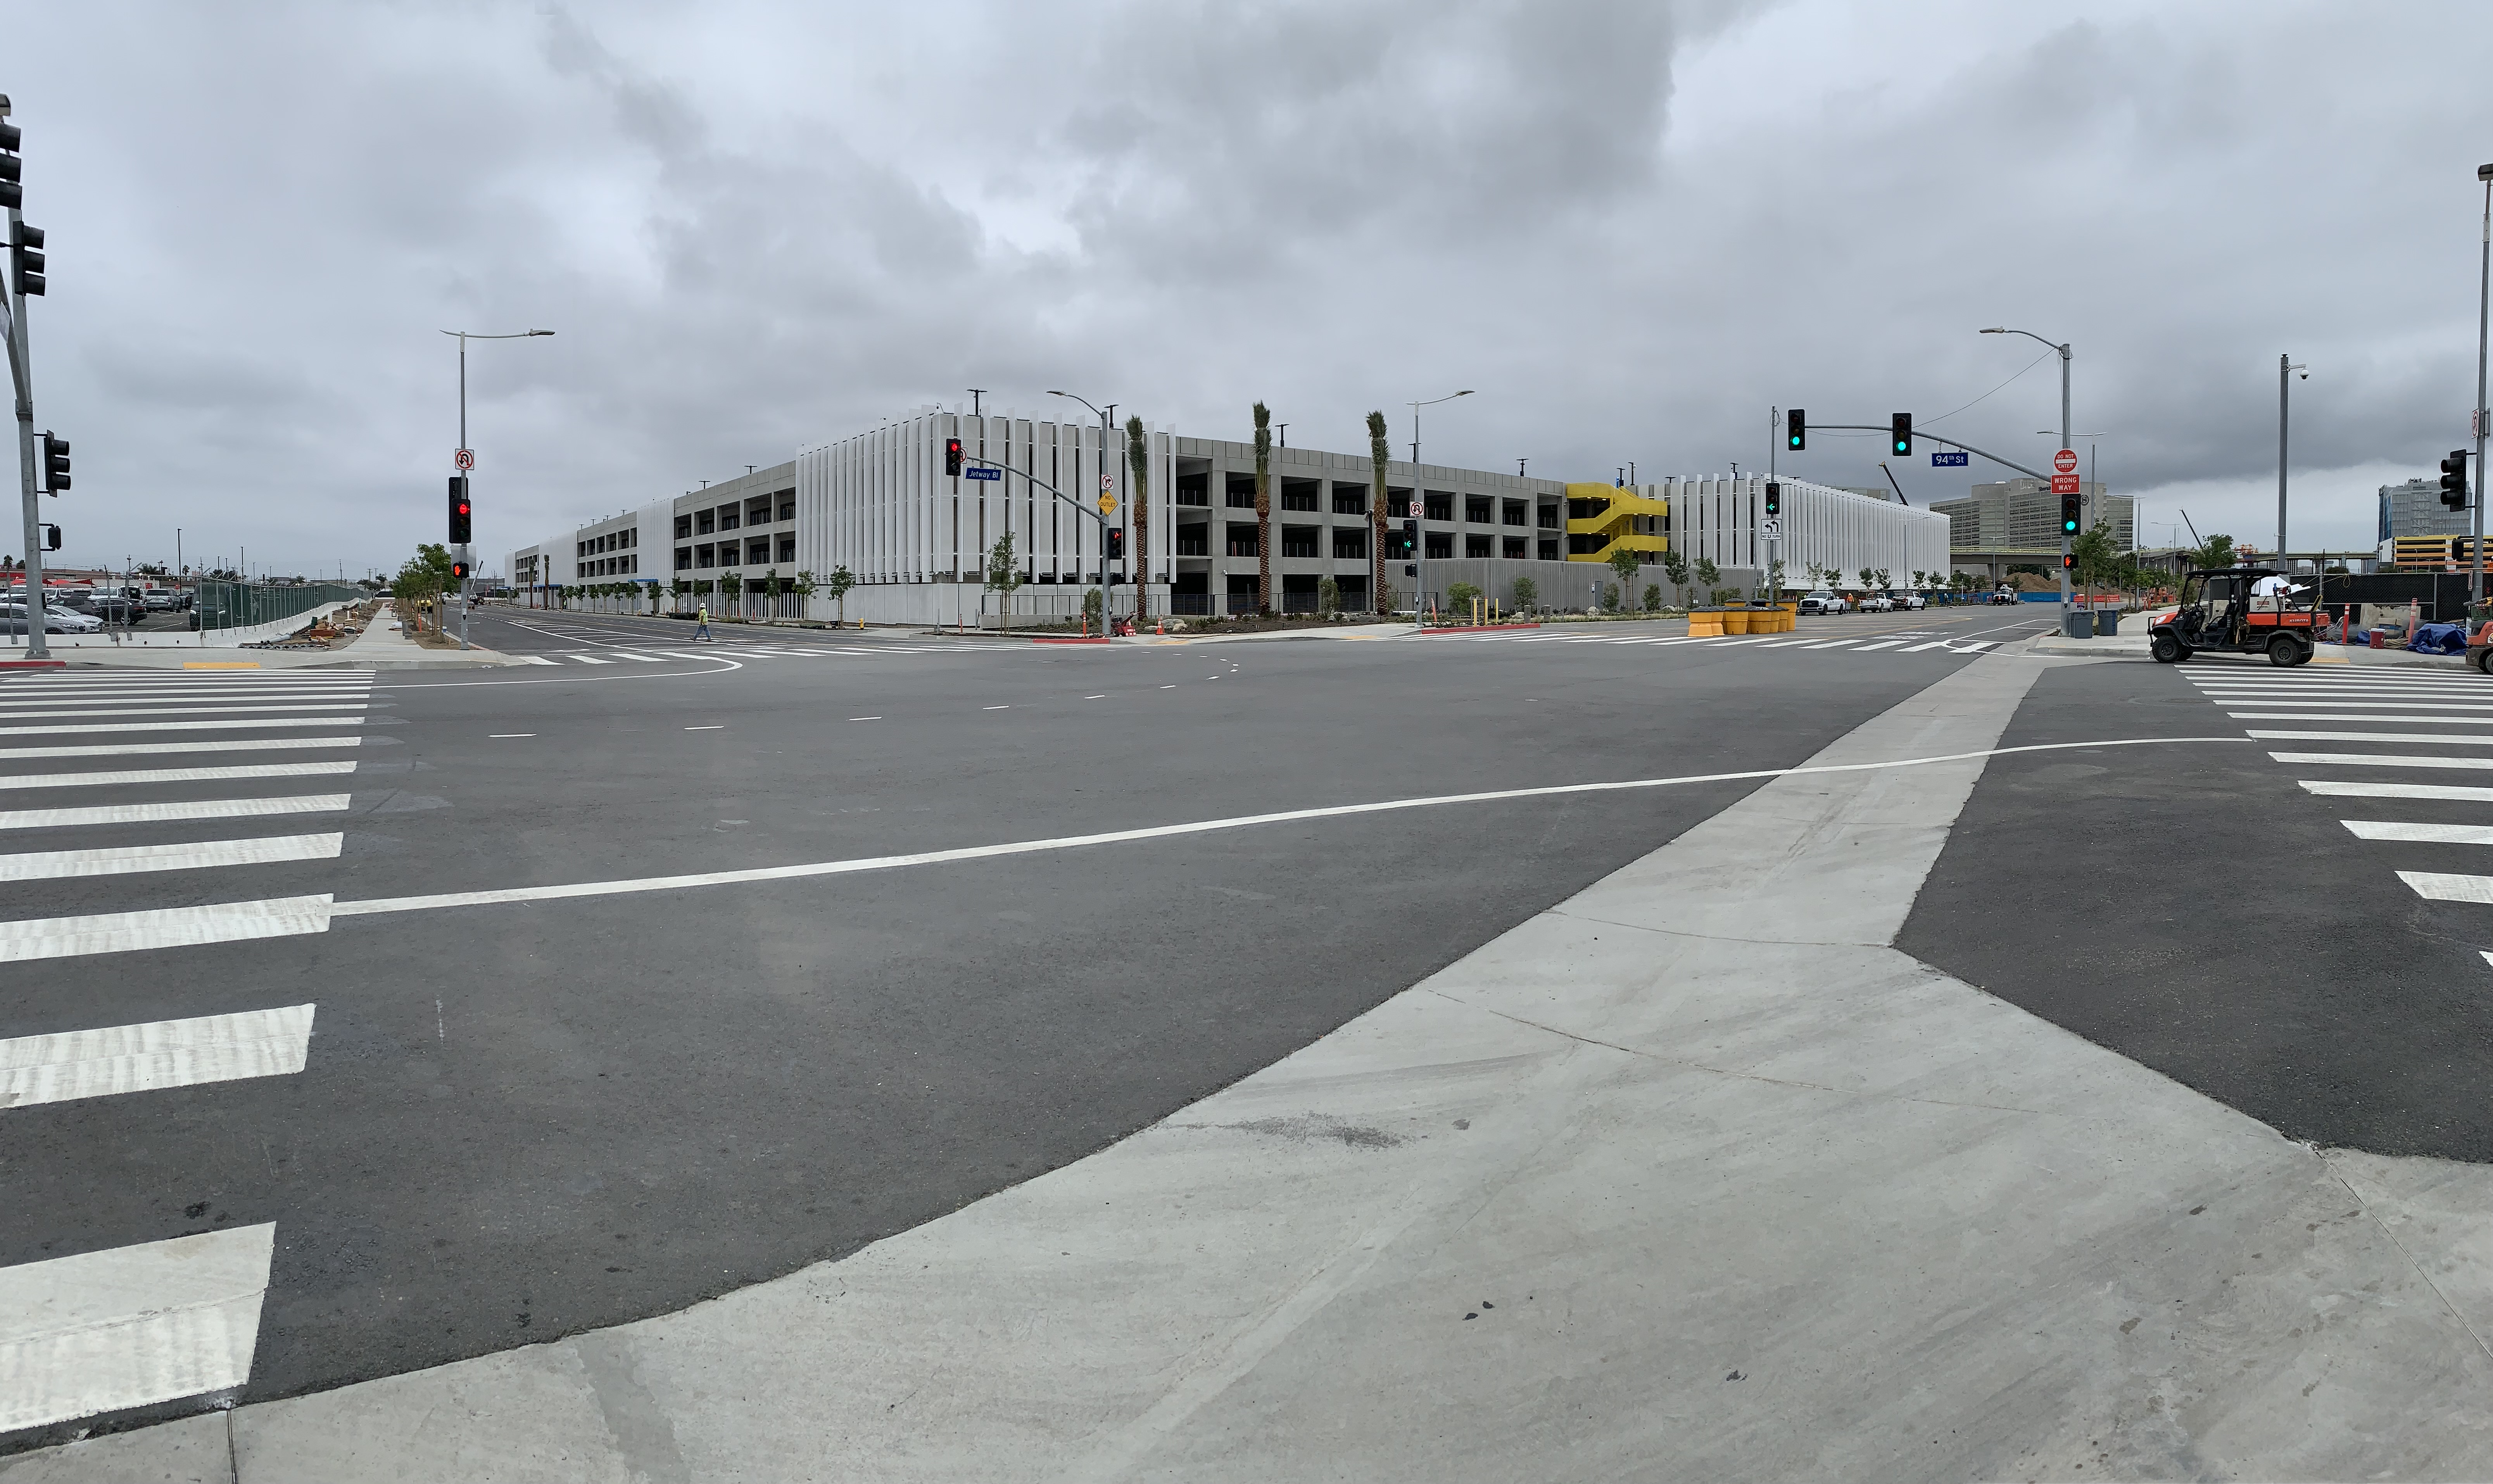 A view of the Intermodal Transportation Facility-West from the corner of 94th Street and Jetway Boulevard.